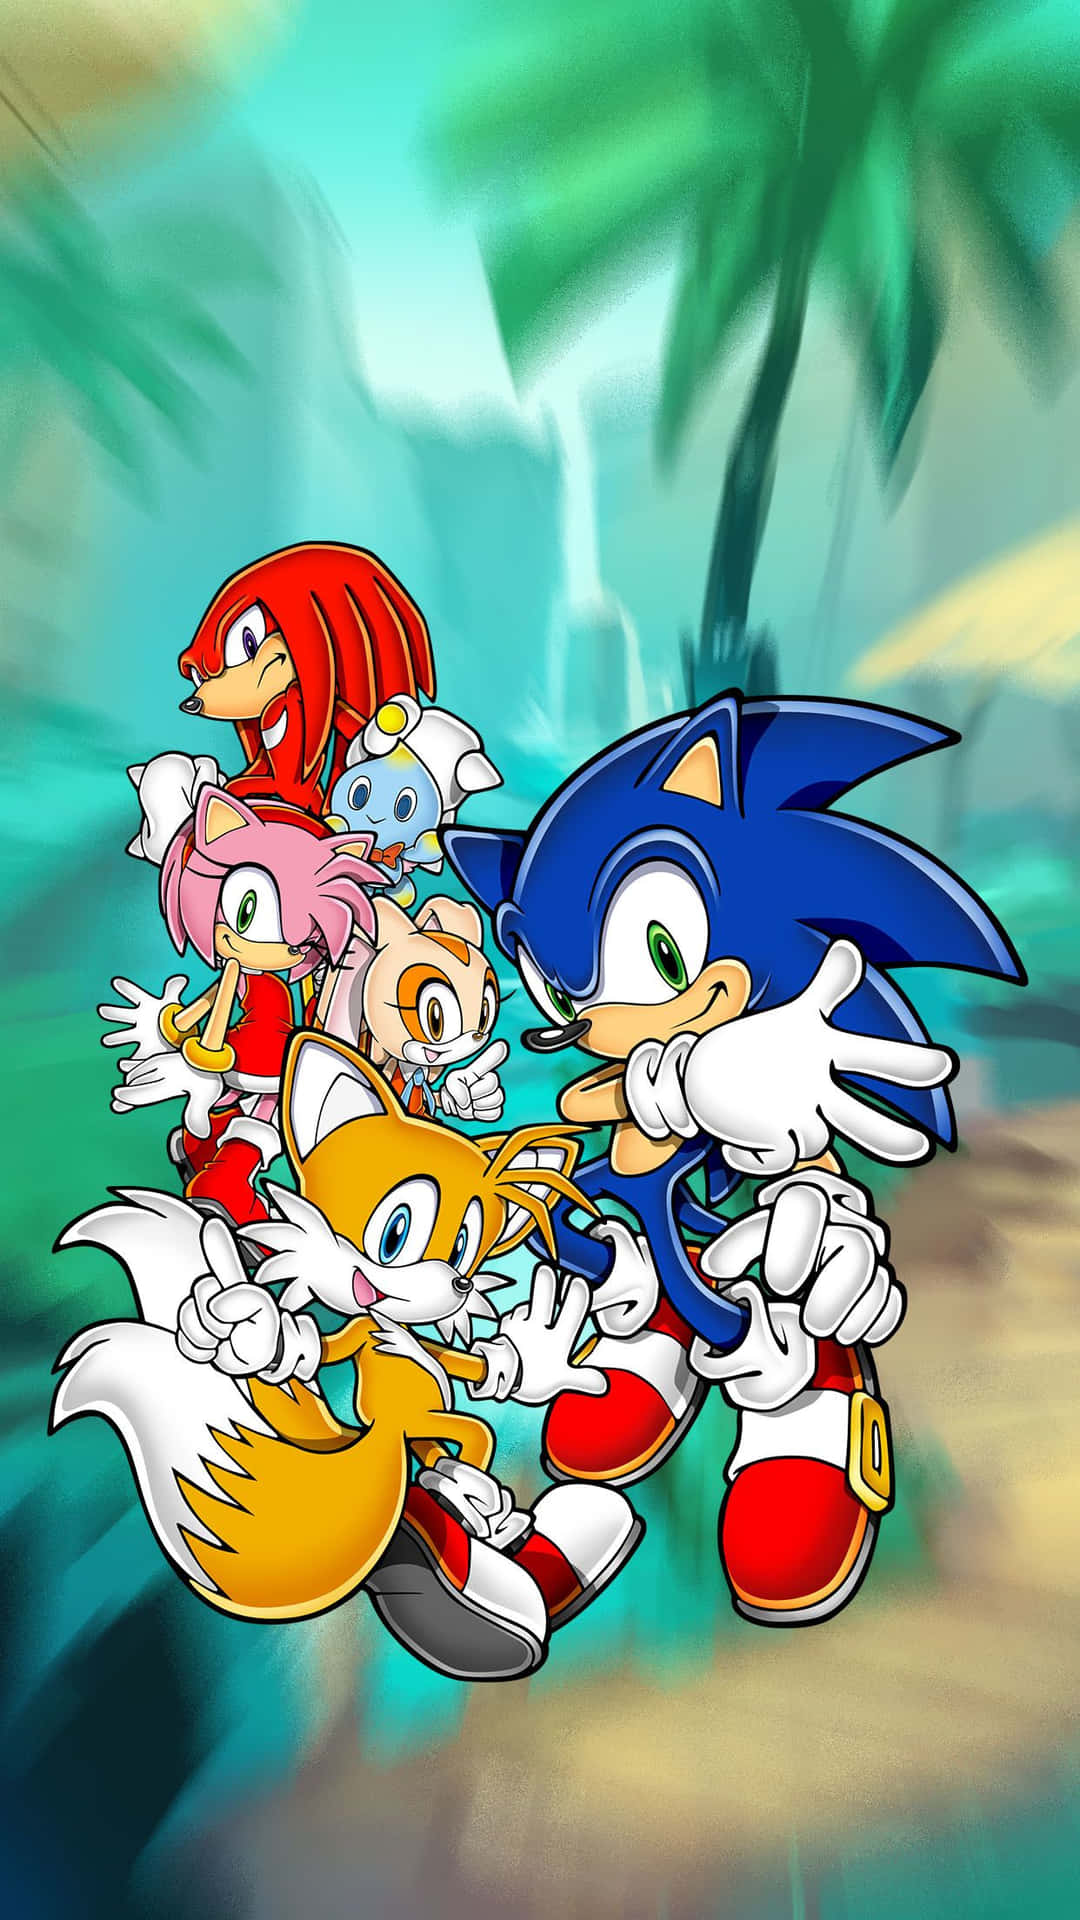 Sonic X - Sonic and Friends in Action Wallpaper